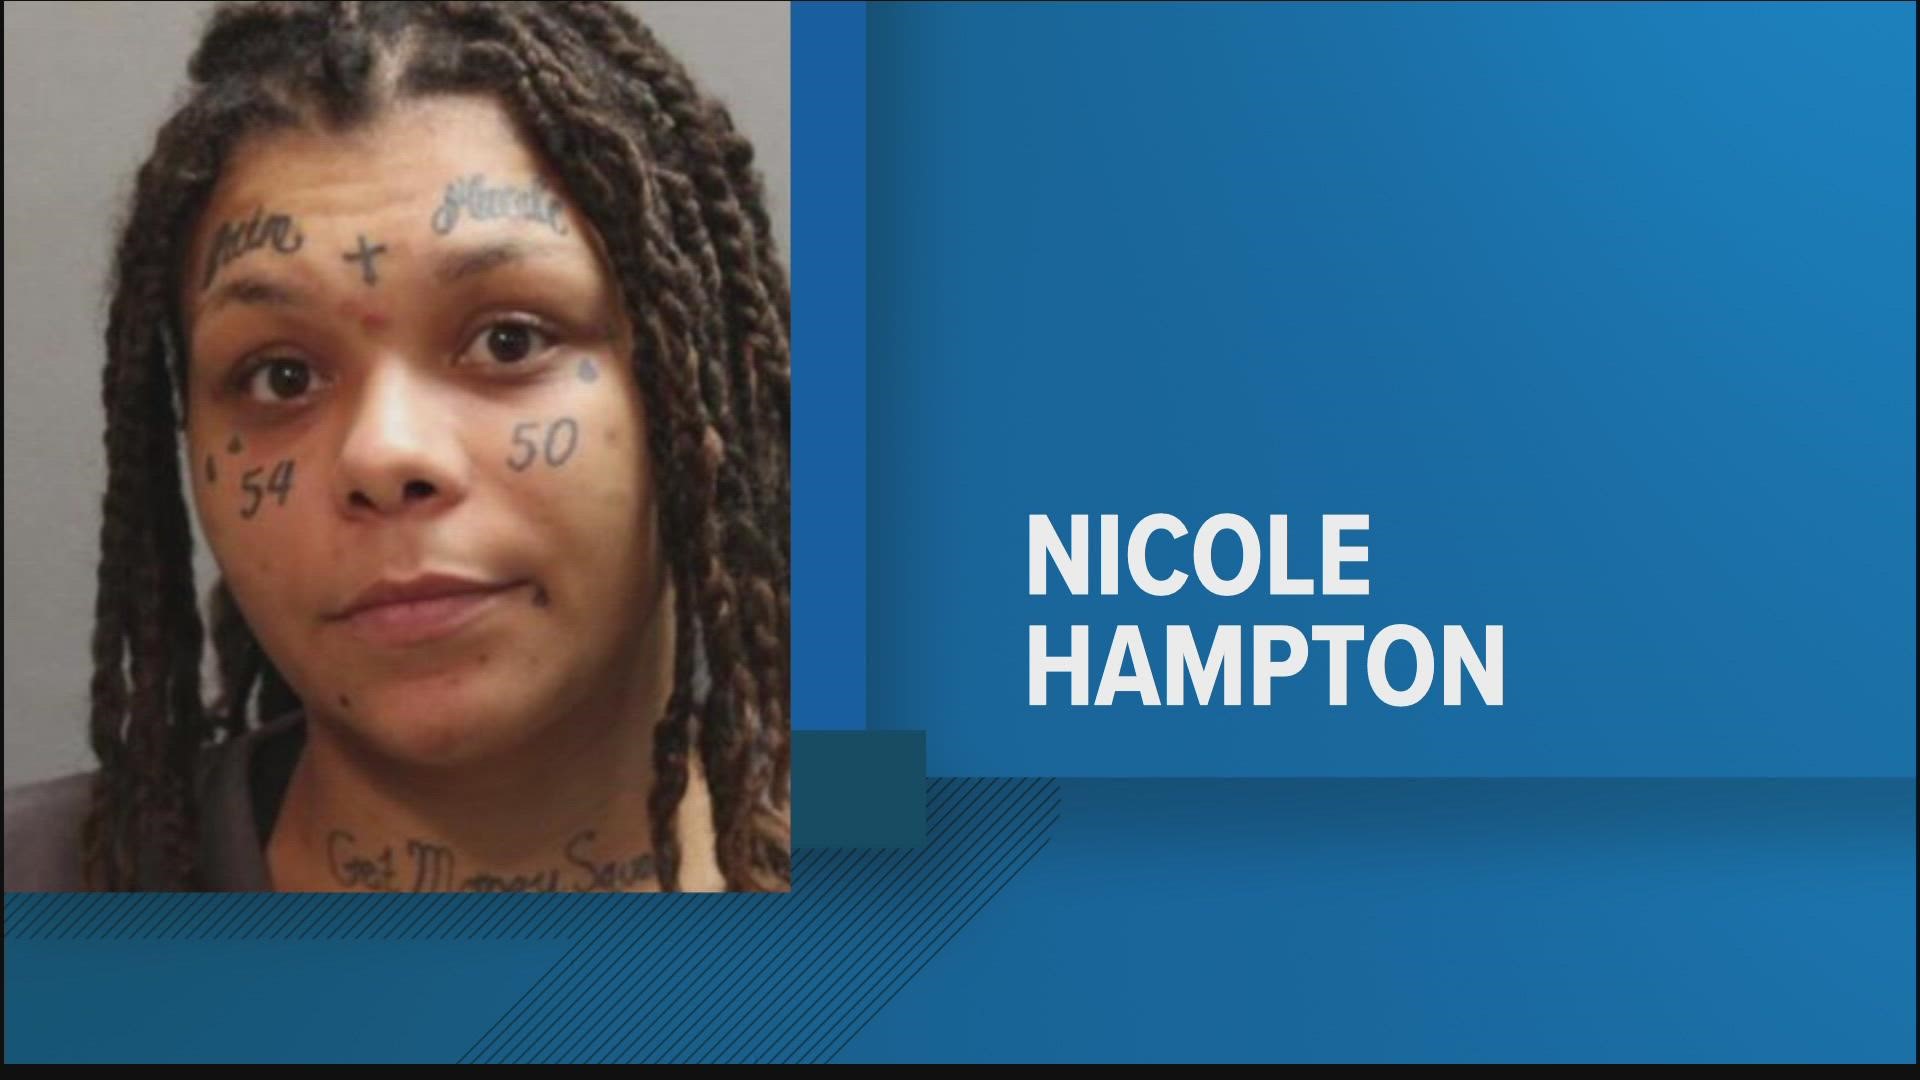 Police say Hampton is responsible for the shooting on Prospect Street in July.